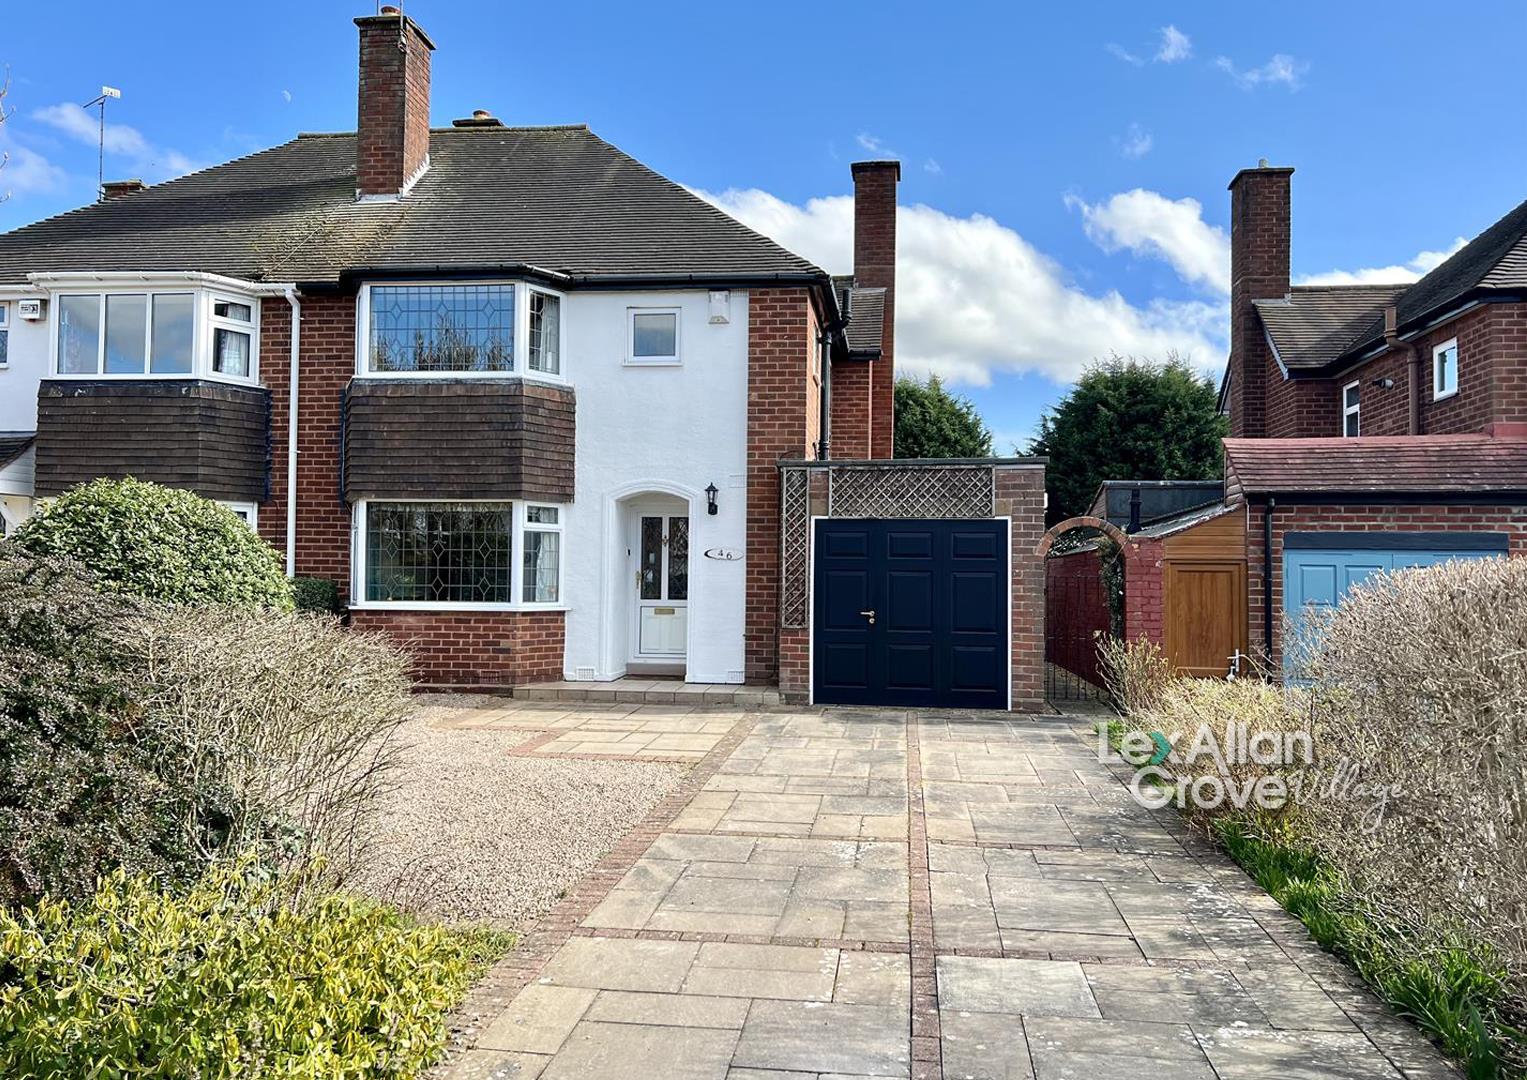 3 bed semi-detached house for sale in Summervale Road, Stourbridge - Property Image 1